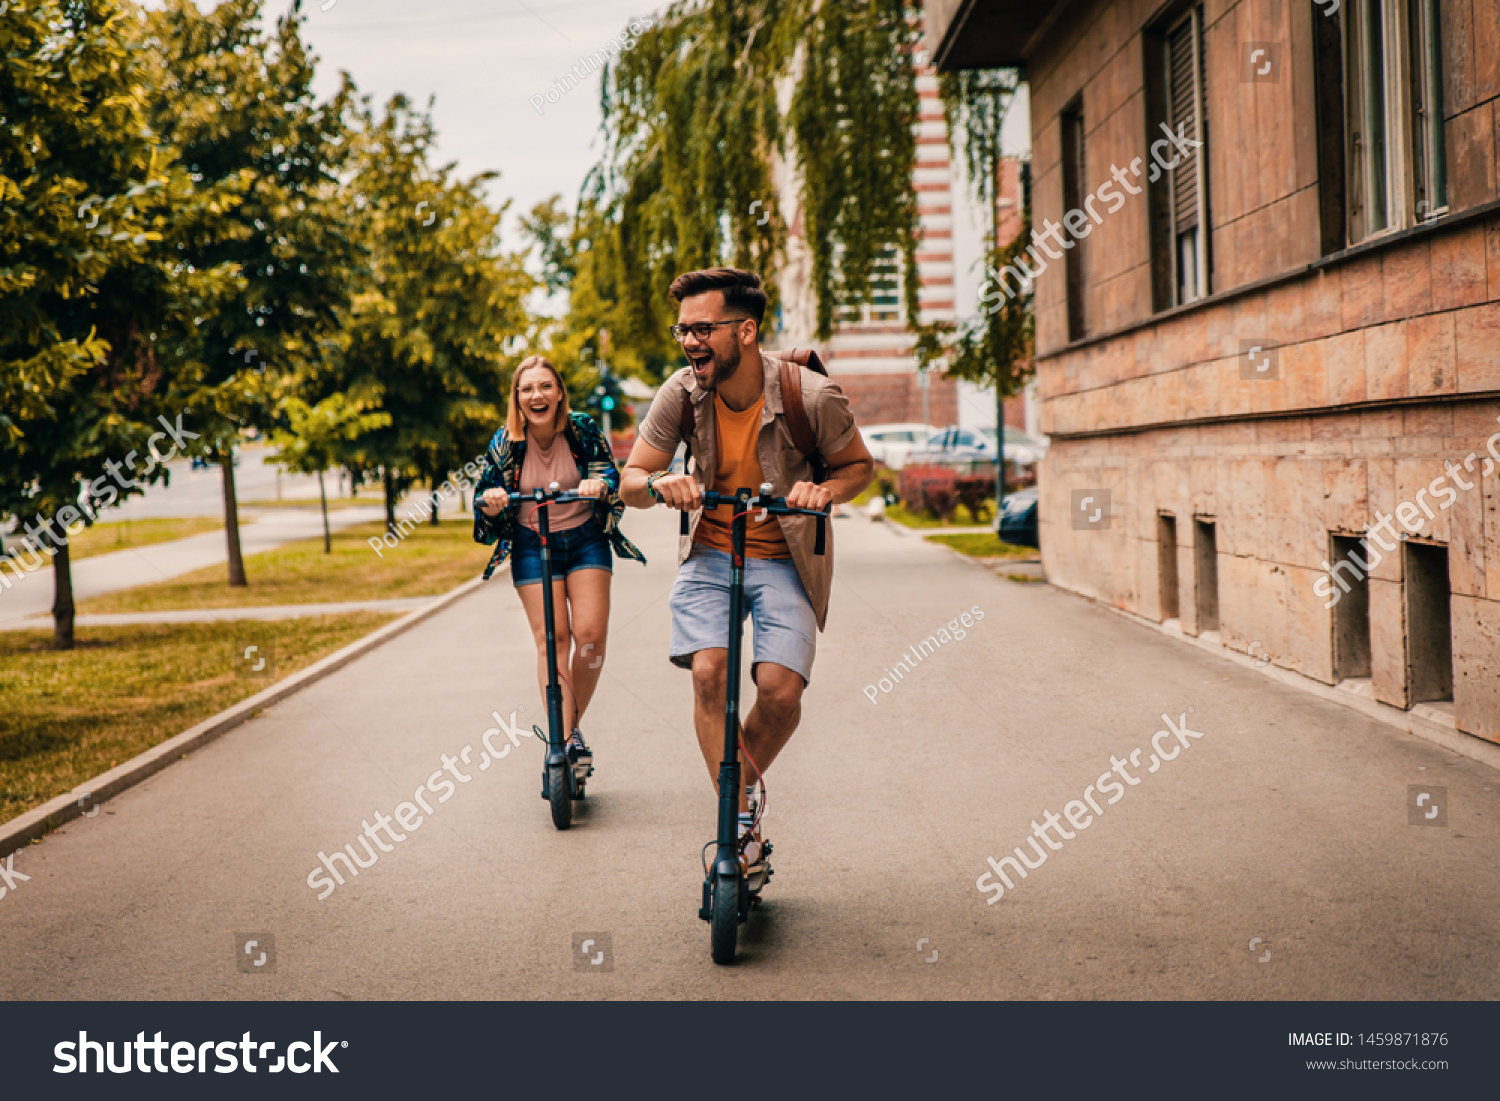 Young couple on vacation having fun driving electric scooter through the city. #1459871876